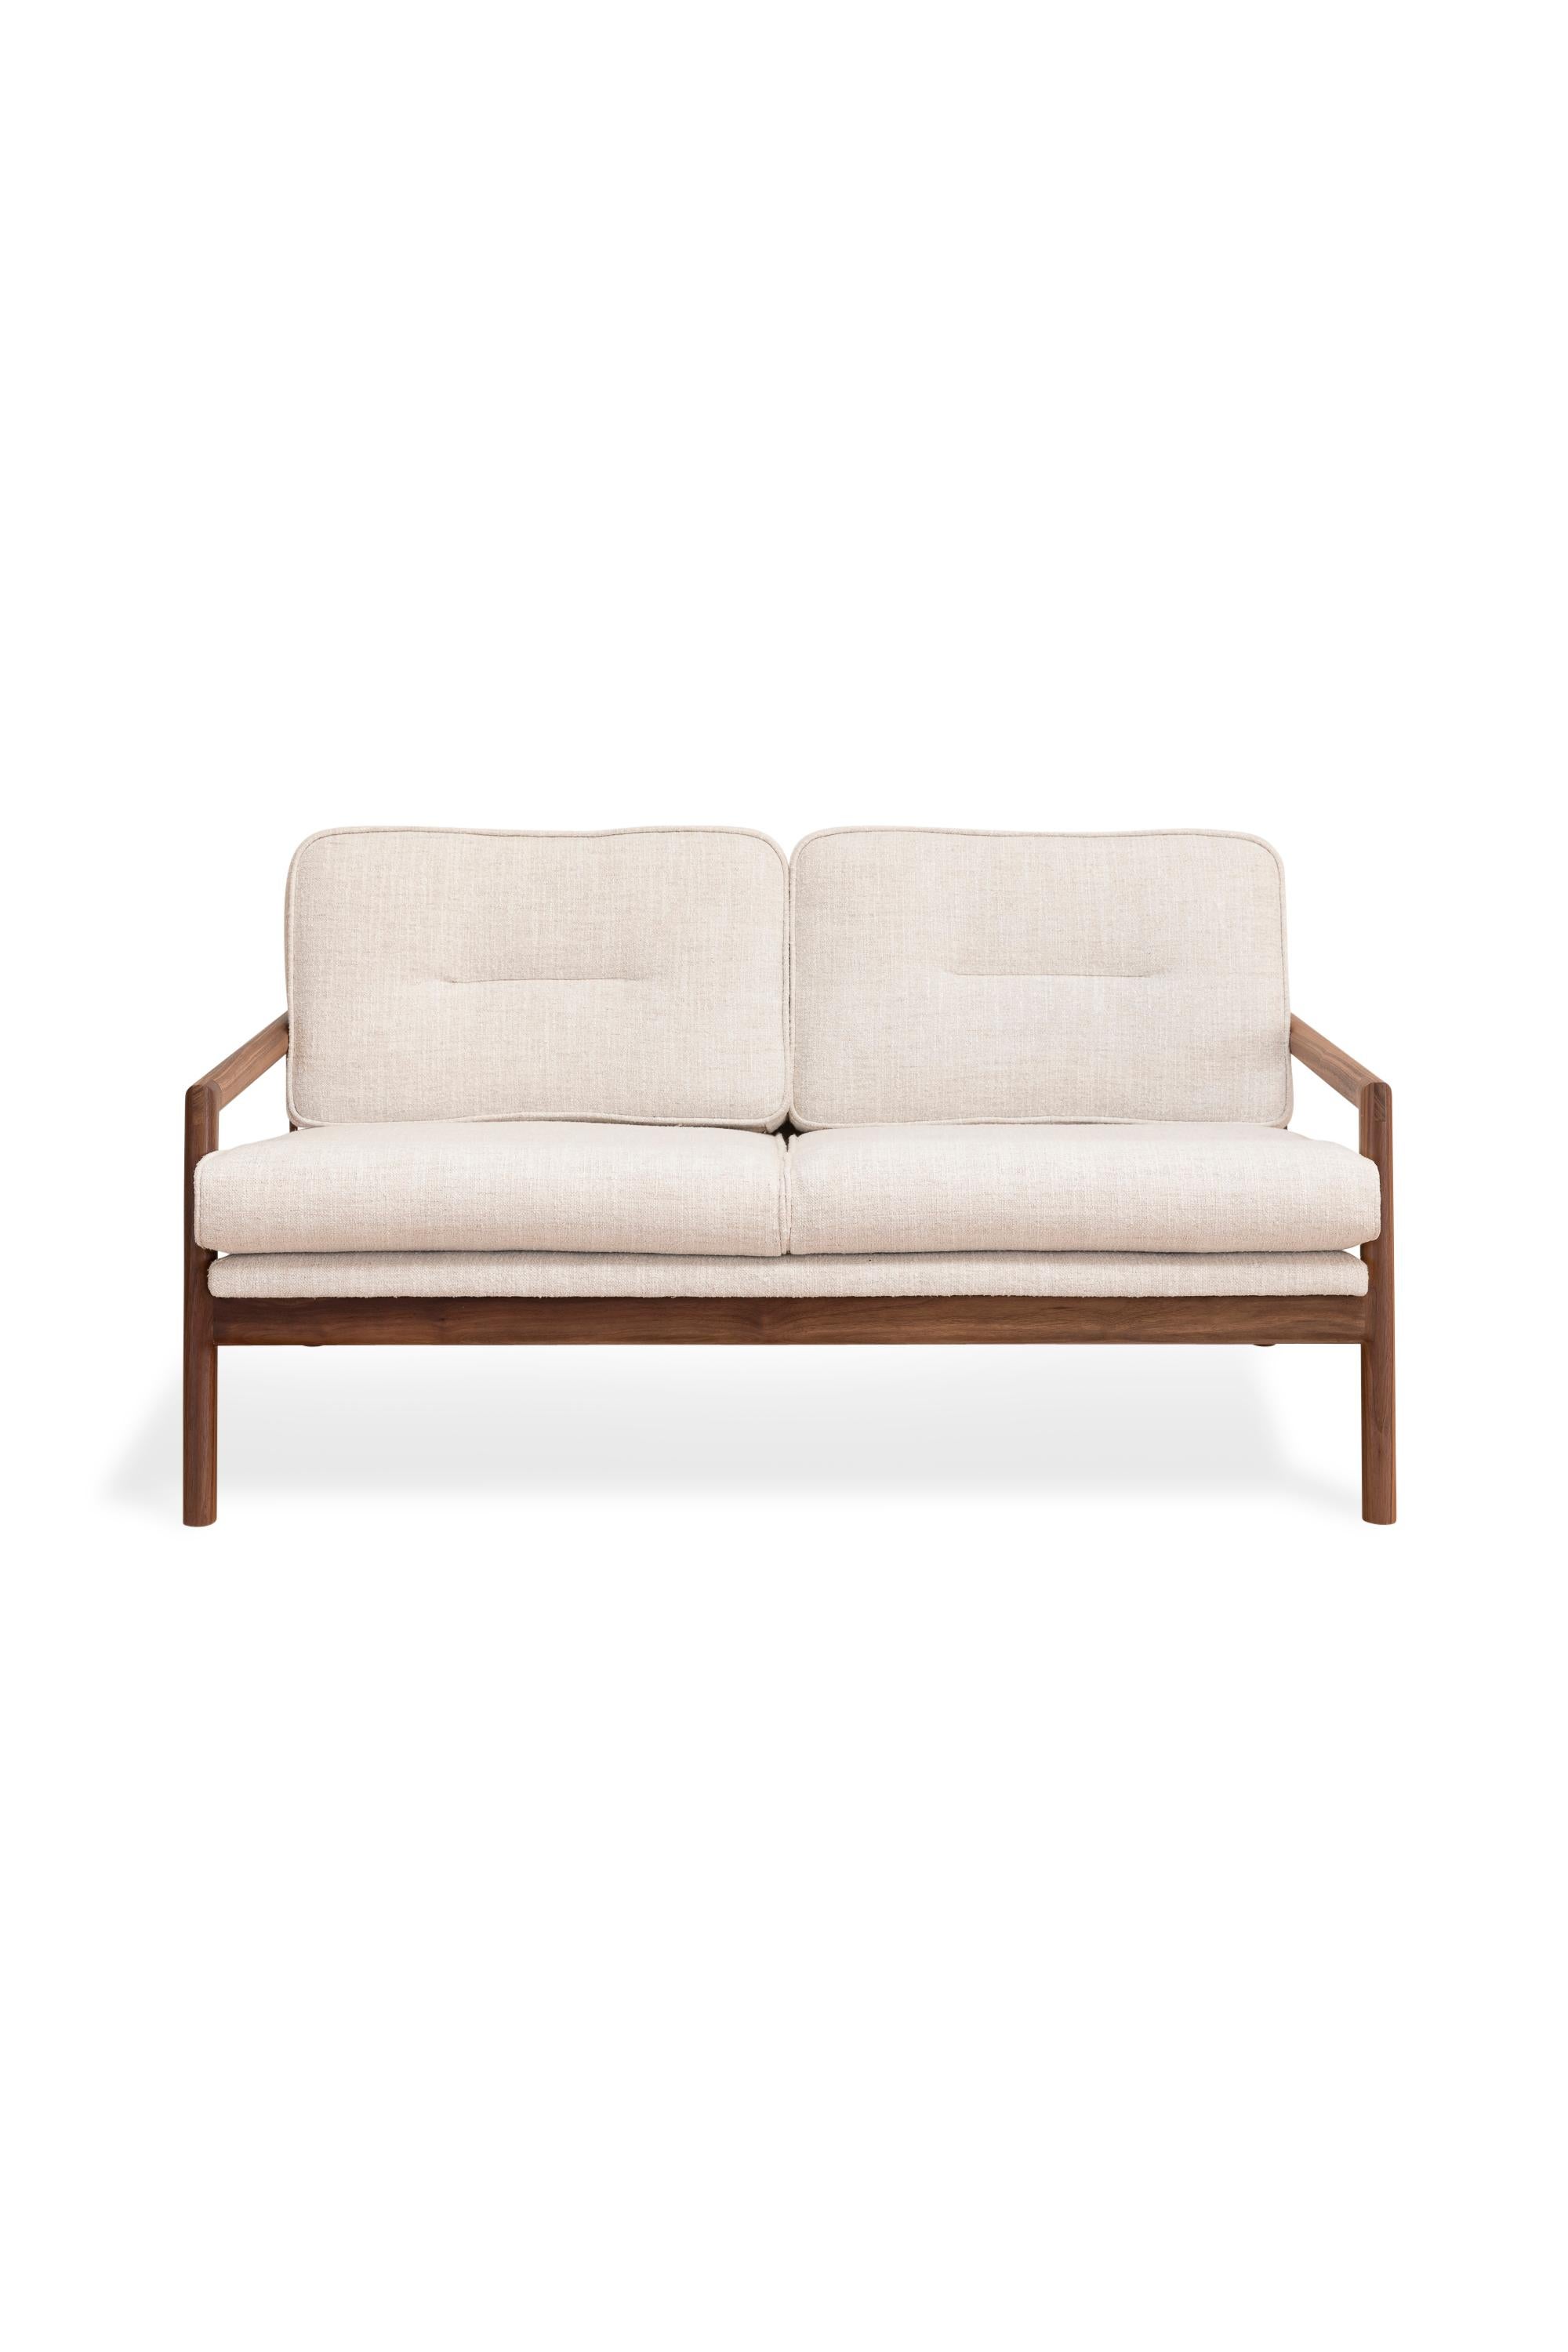 This handmade solid wood constructed sofa includes handcut joinery and custom upholtered seat and seat back cushions.

This sofa is shown in our in maharam plume ciabatta ivory textured linen with a walnut frame.
Most Maharam upholstery fabrics